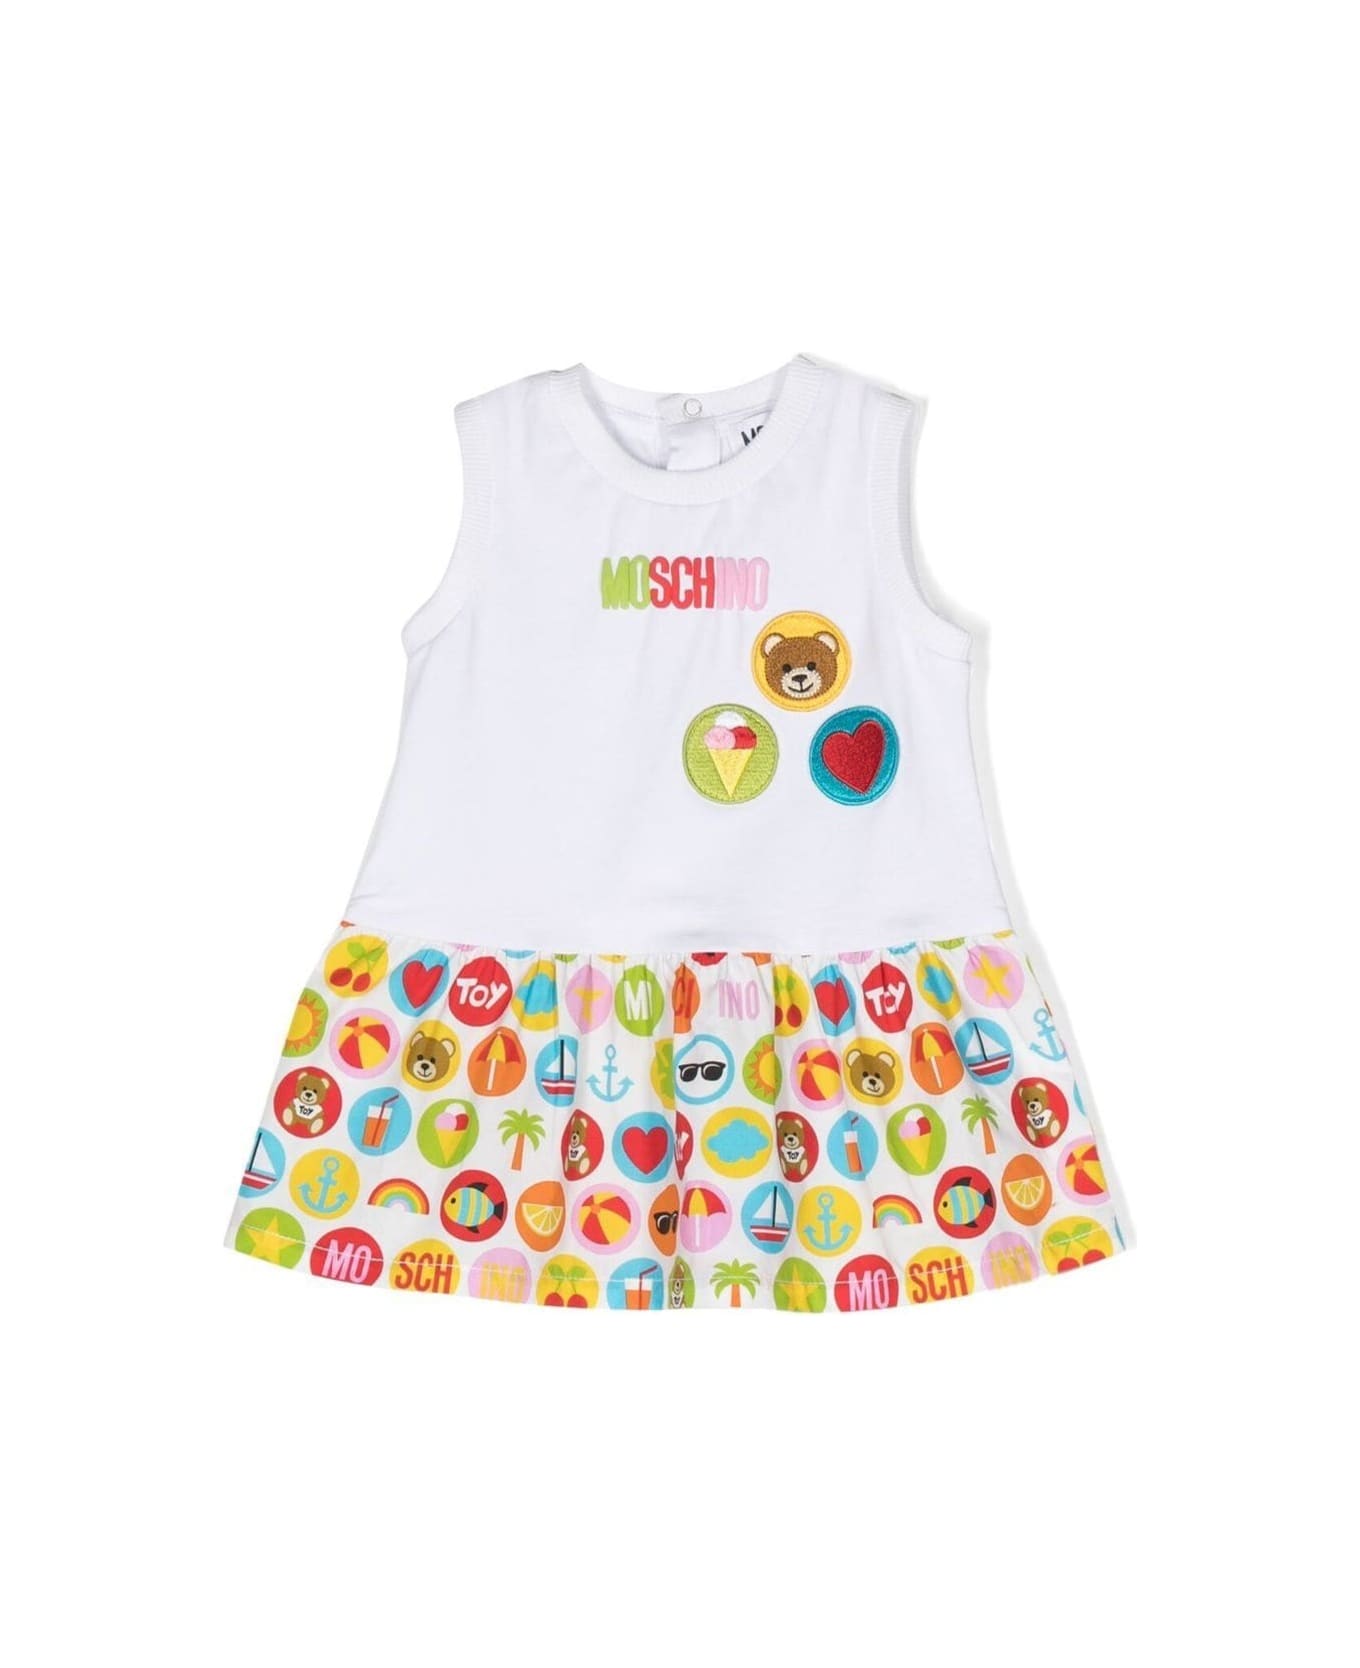 Moschino Multicolor Sleeveless Dress With Patch And Graphic Print In Stretch Cotton Baby - Multicolor